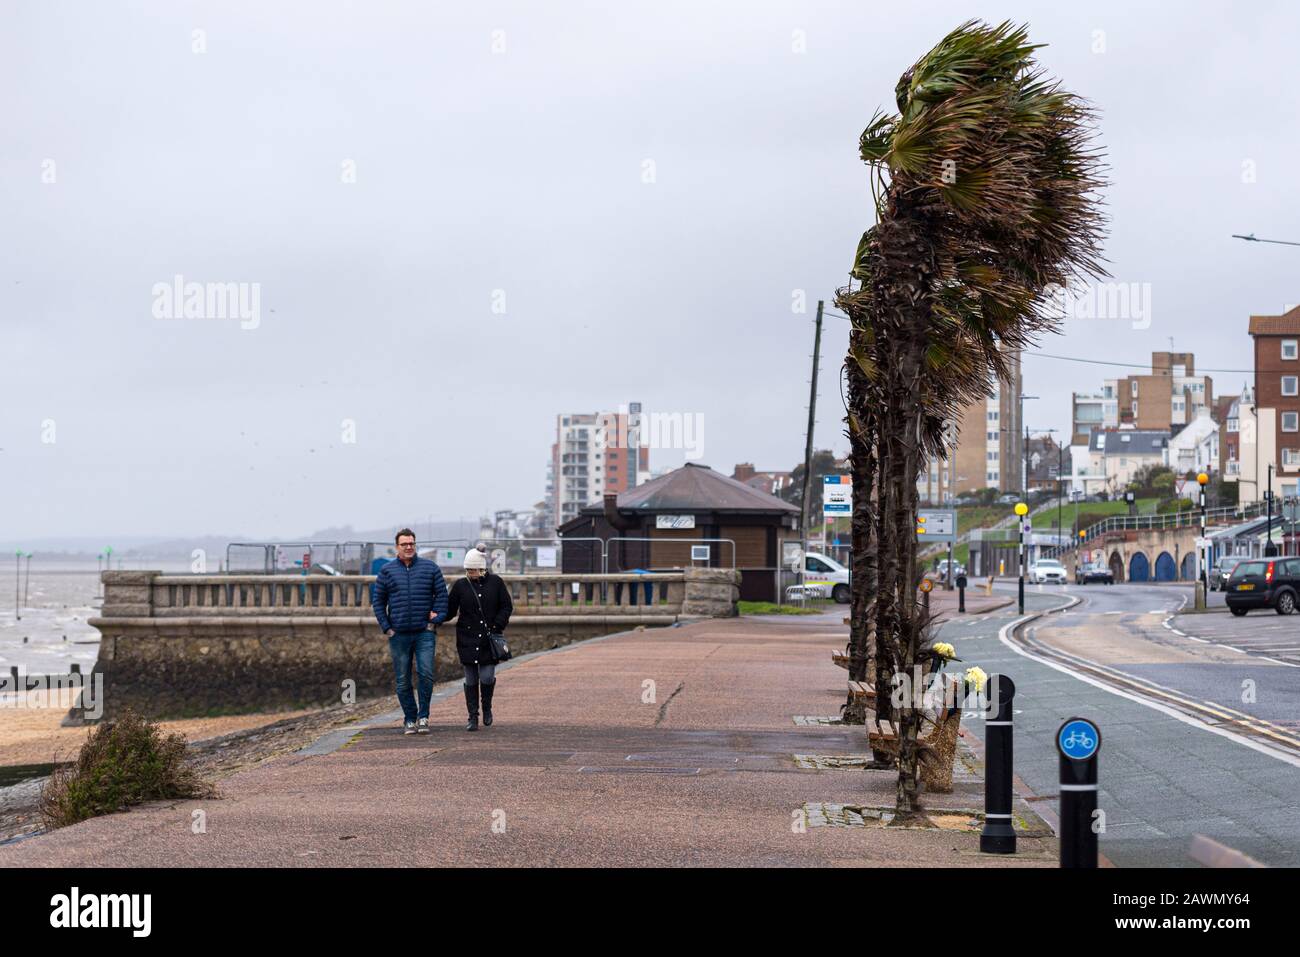 People walking along the promenade passing wind blown palm trees on seafront as storm Ciara affects the weather in Southend on Sea, Essex, UK Stock Photo